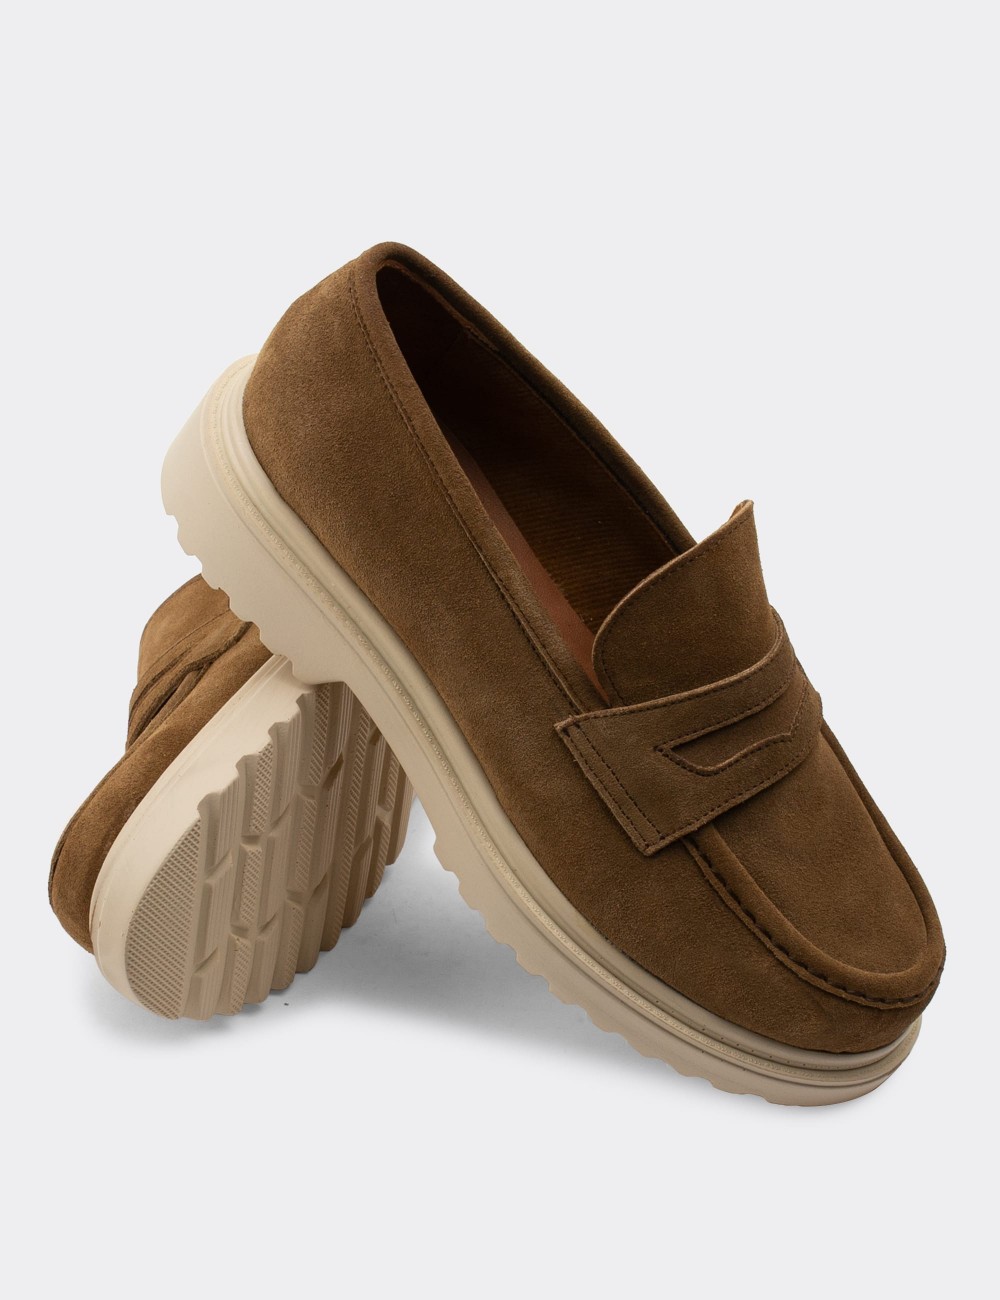 Sandstone Suede Leather Loafers - 01903ZVZNP02